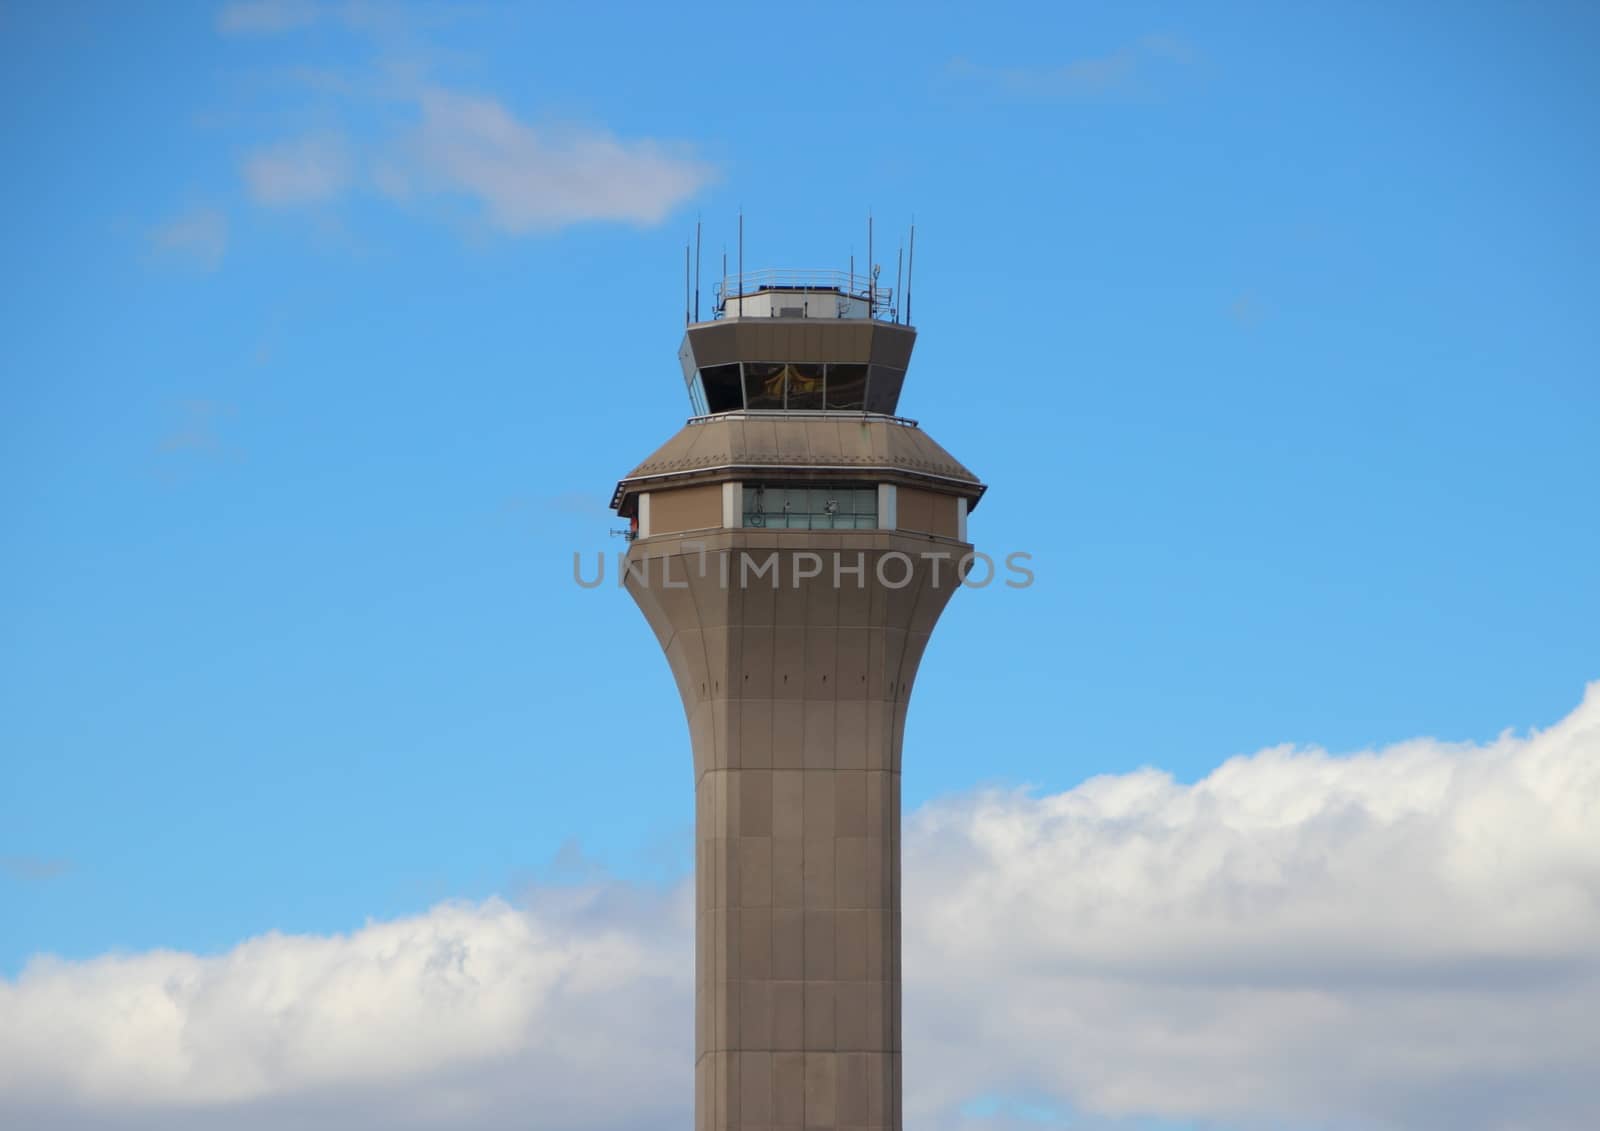 Airport Control Tower with Clouds and Blue Sky by HoleInTheBox